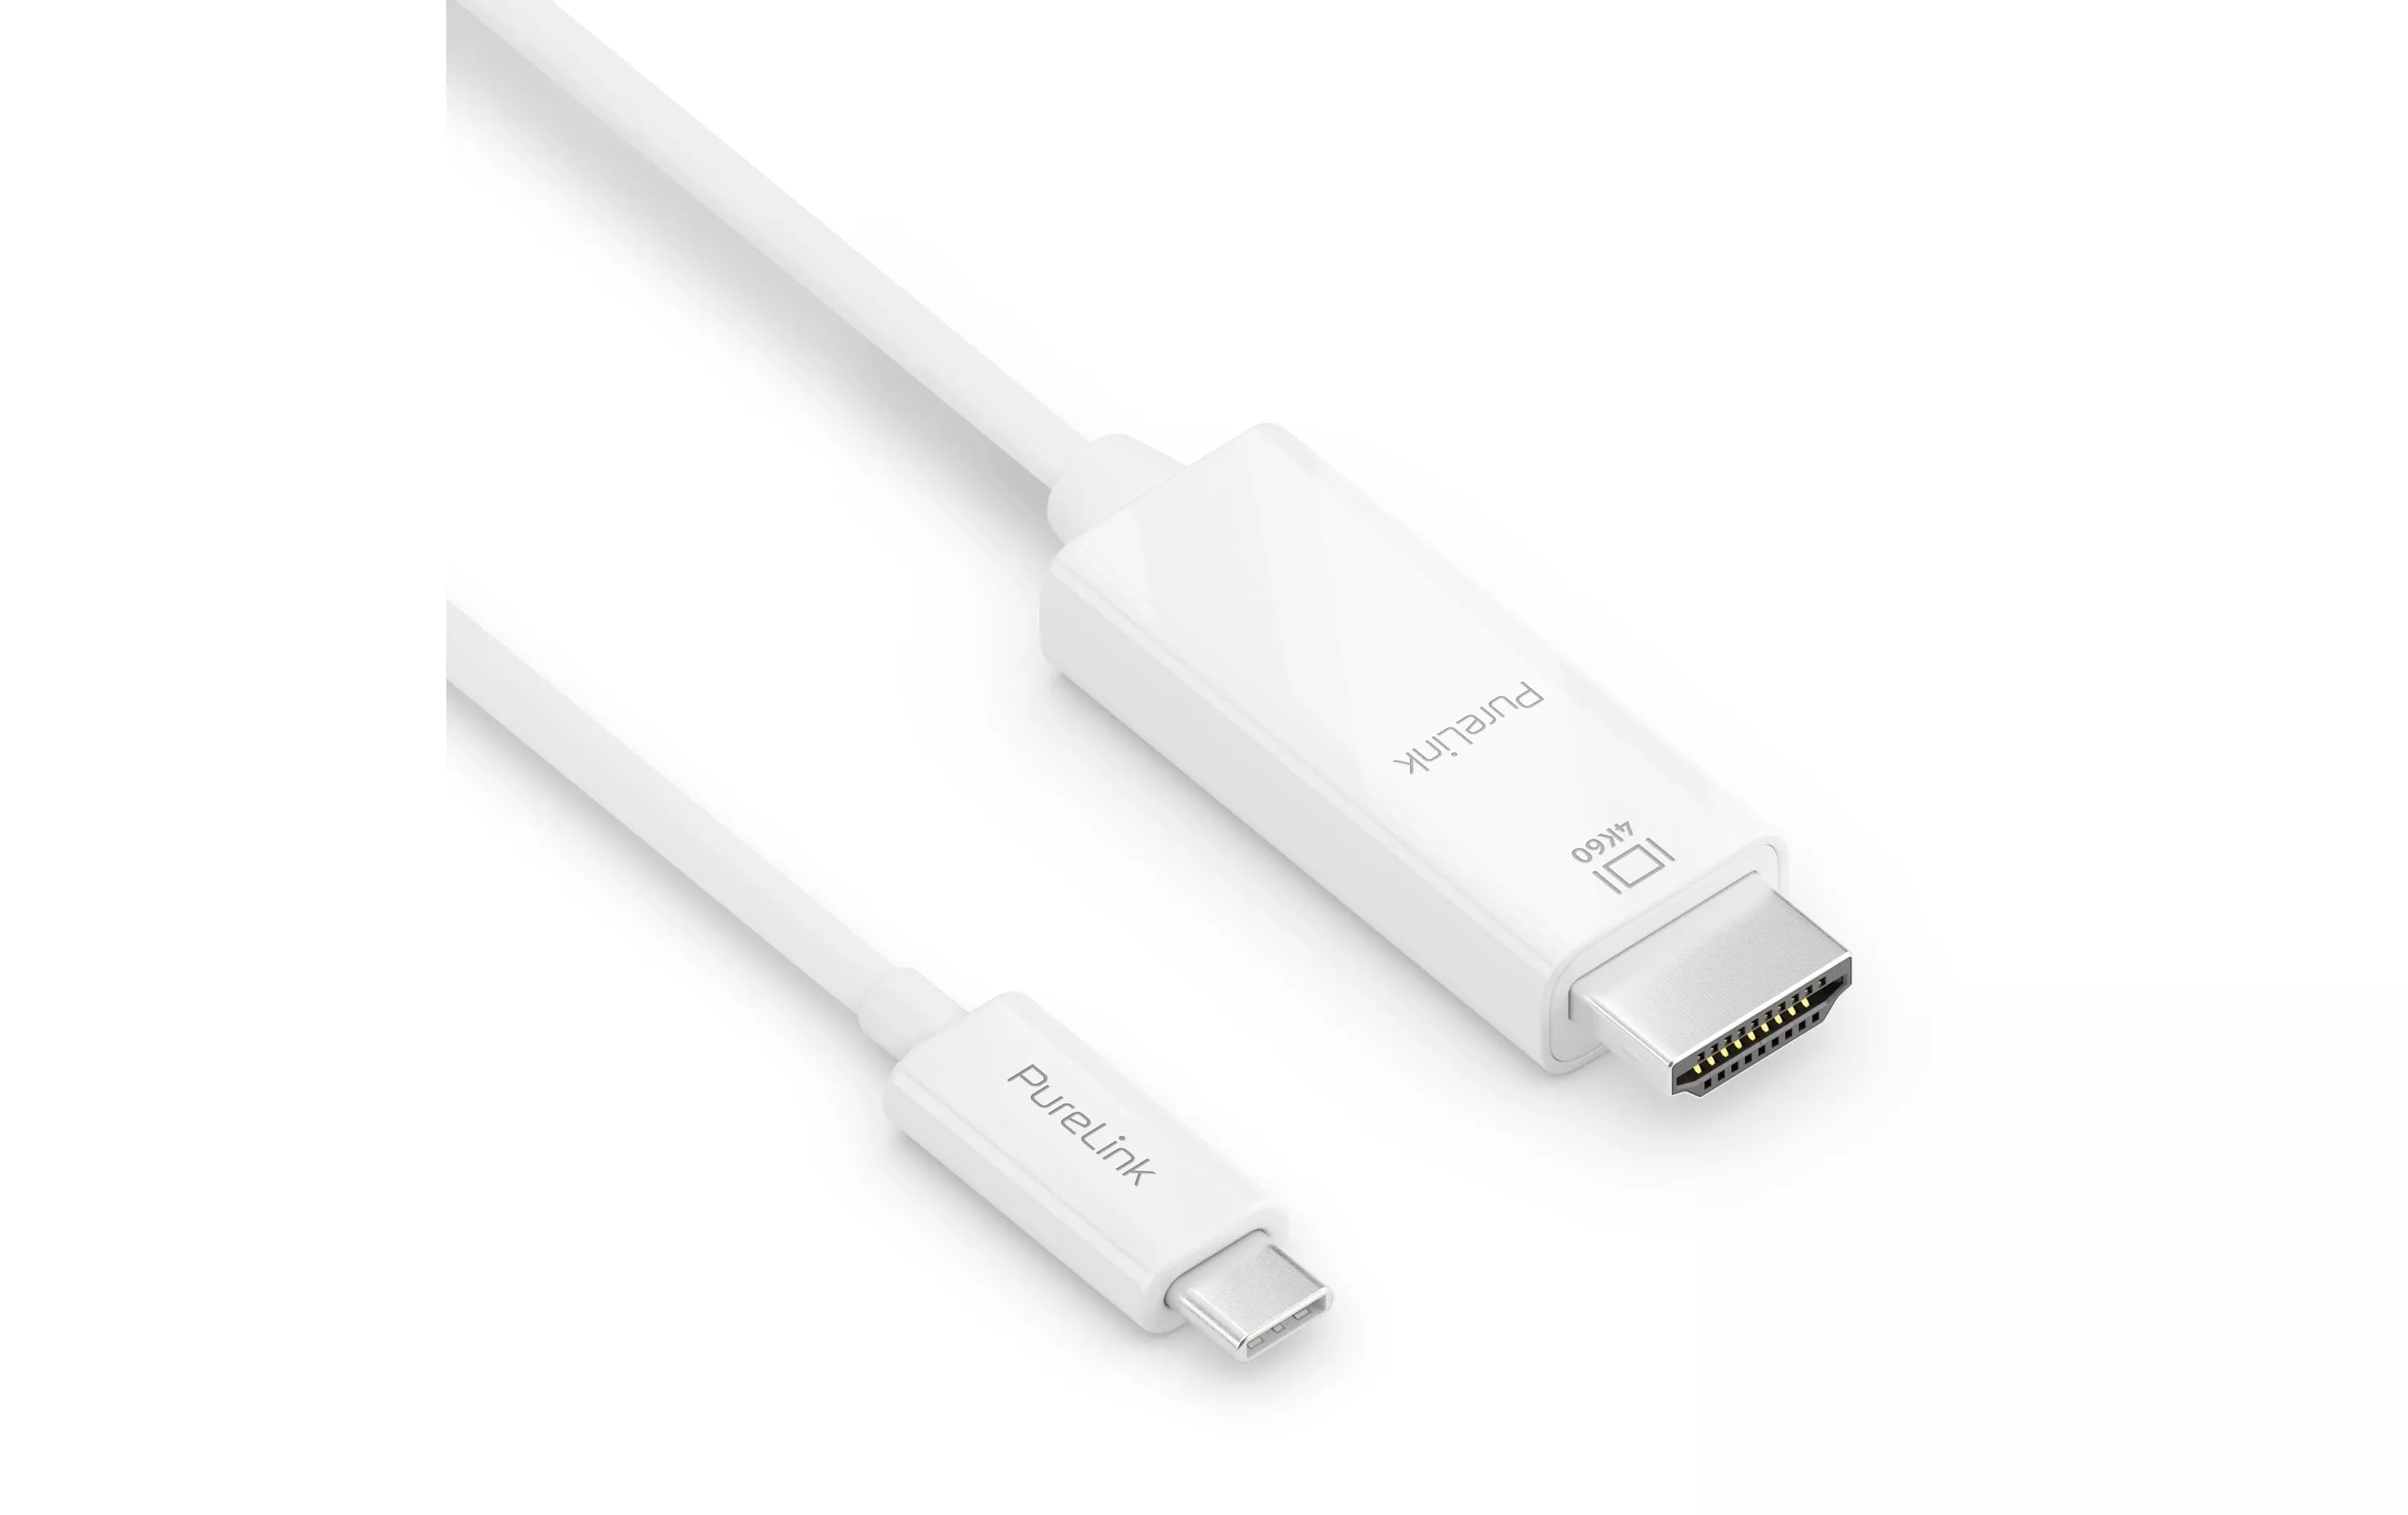 Kabel IS2200-015 USB Type-C - HDMI, 1.5 m, Weiss